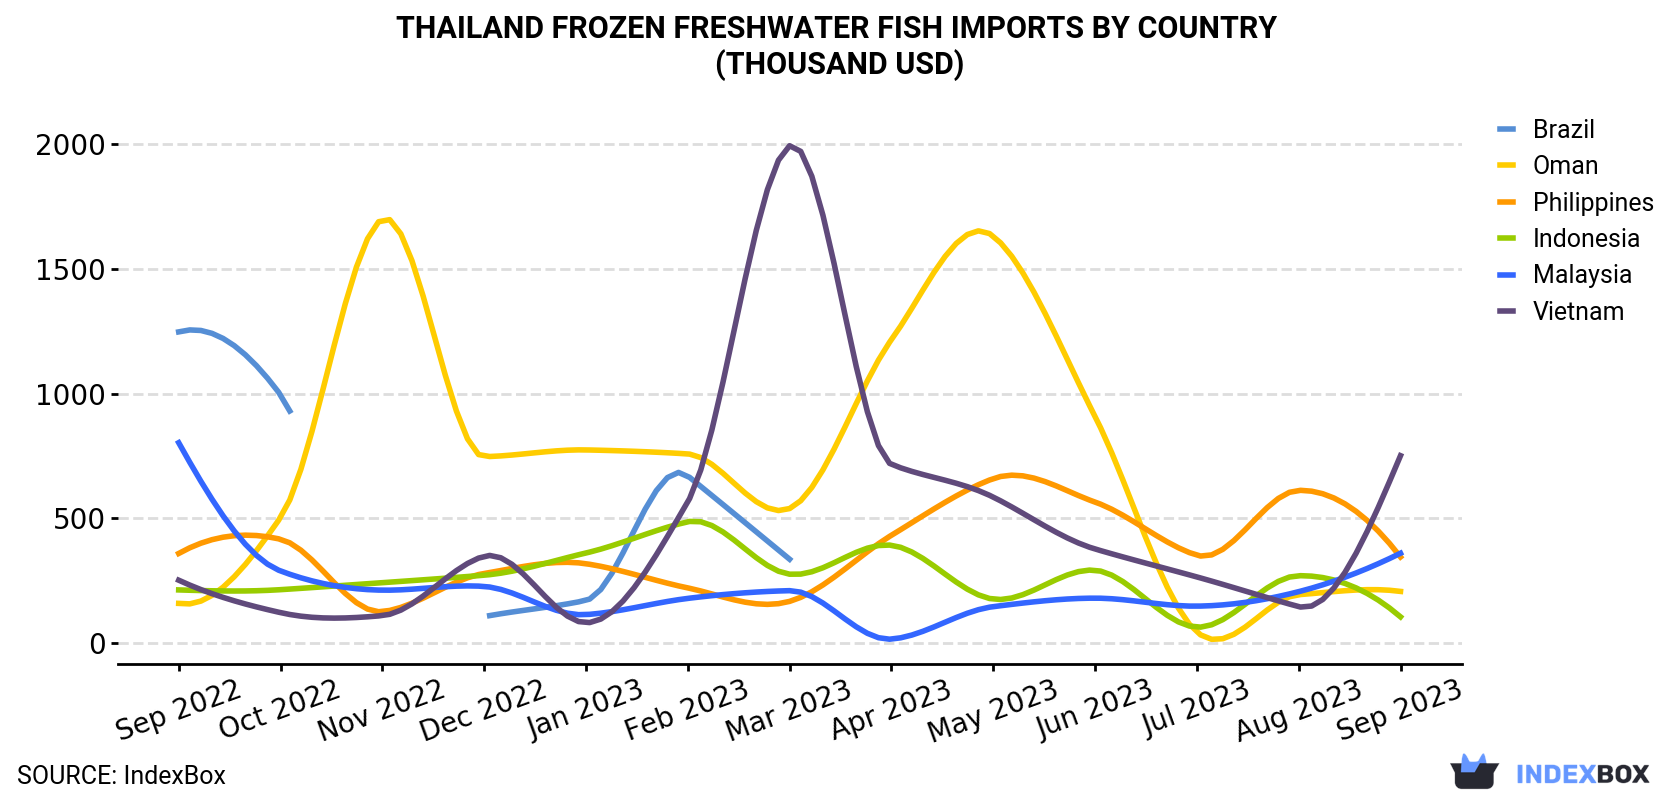 Thailand Frozen Freshwater Fish Imports By Country (Thousand USD)